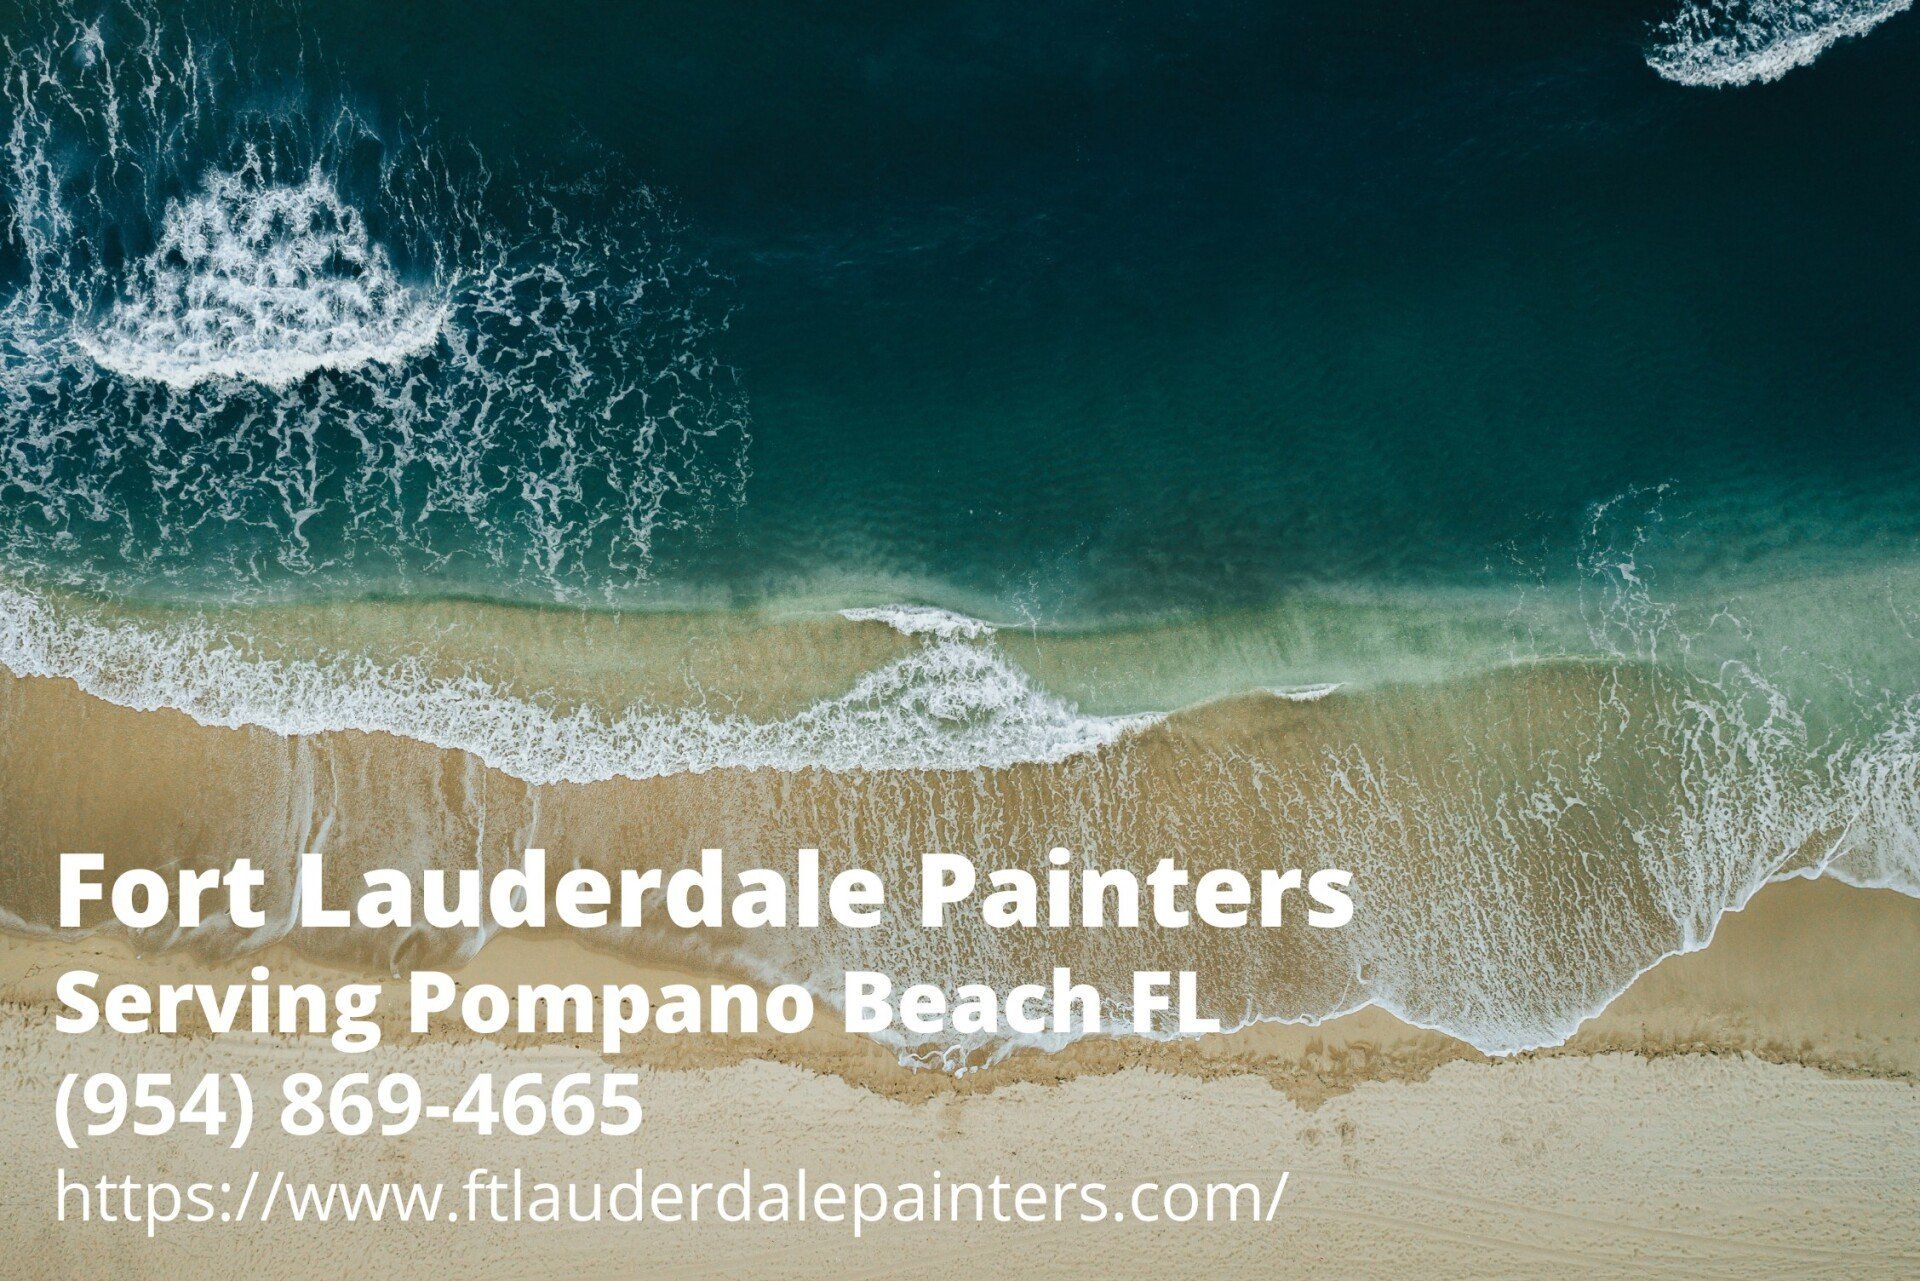 aerial view of the Pompano Beach with the business details of Fort Lauderdale Painters